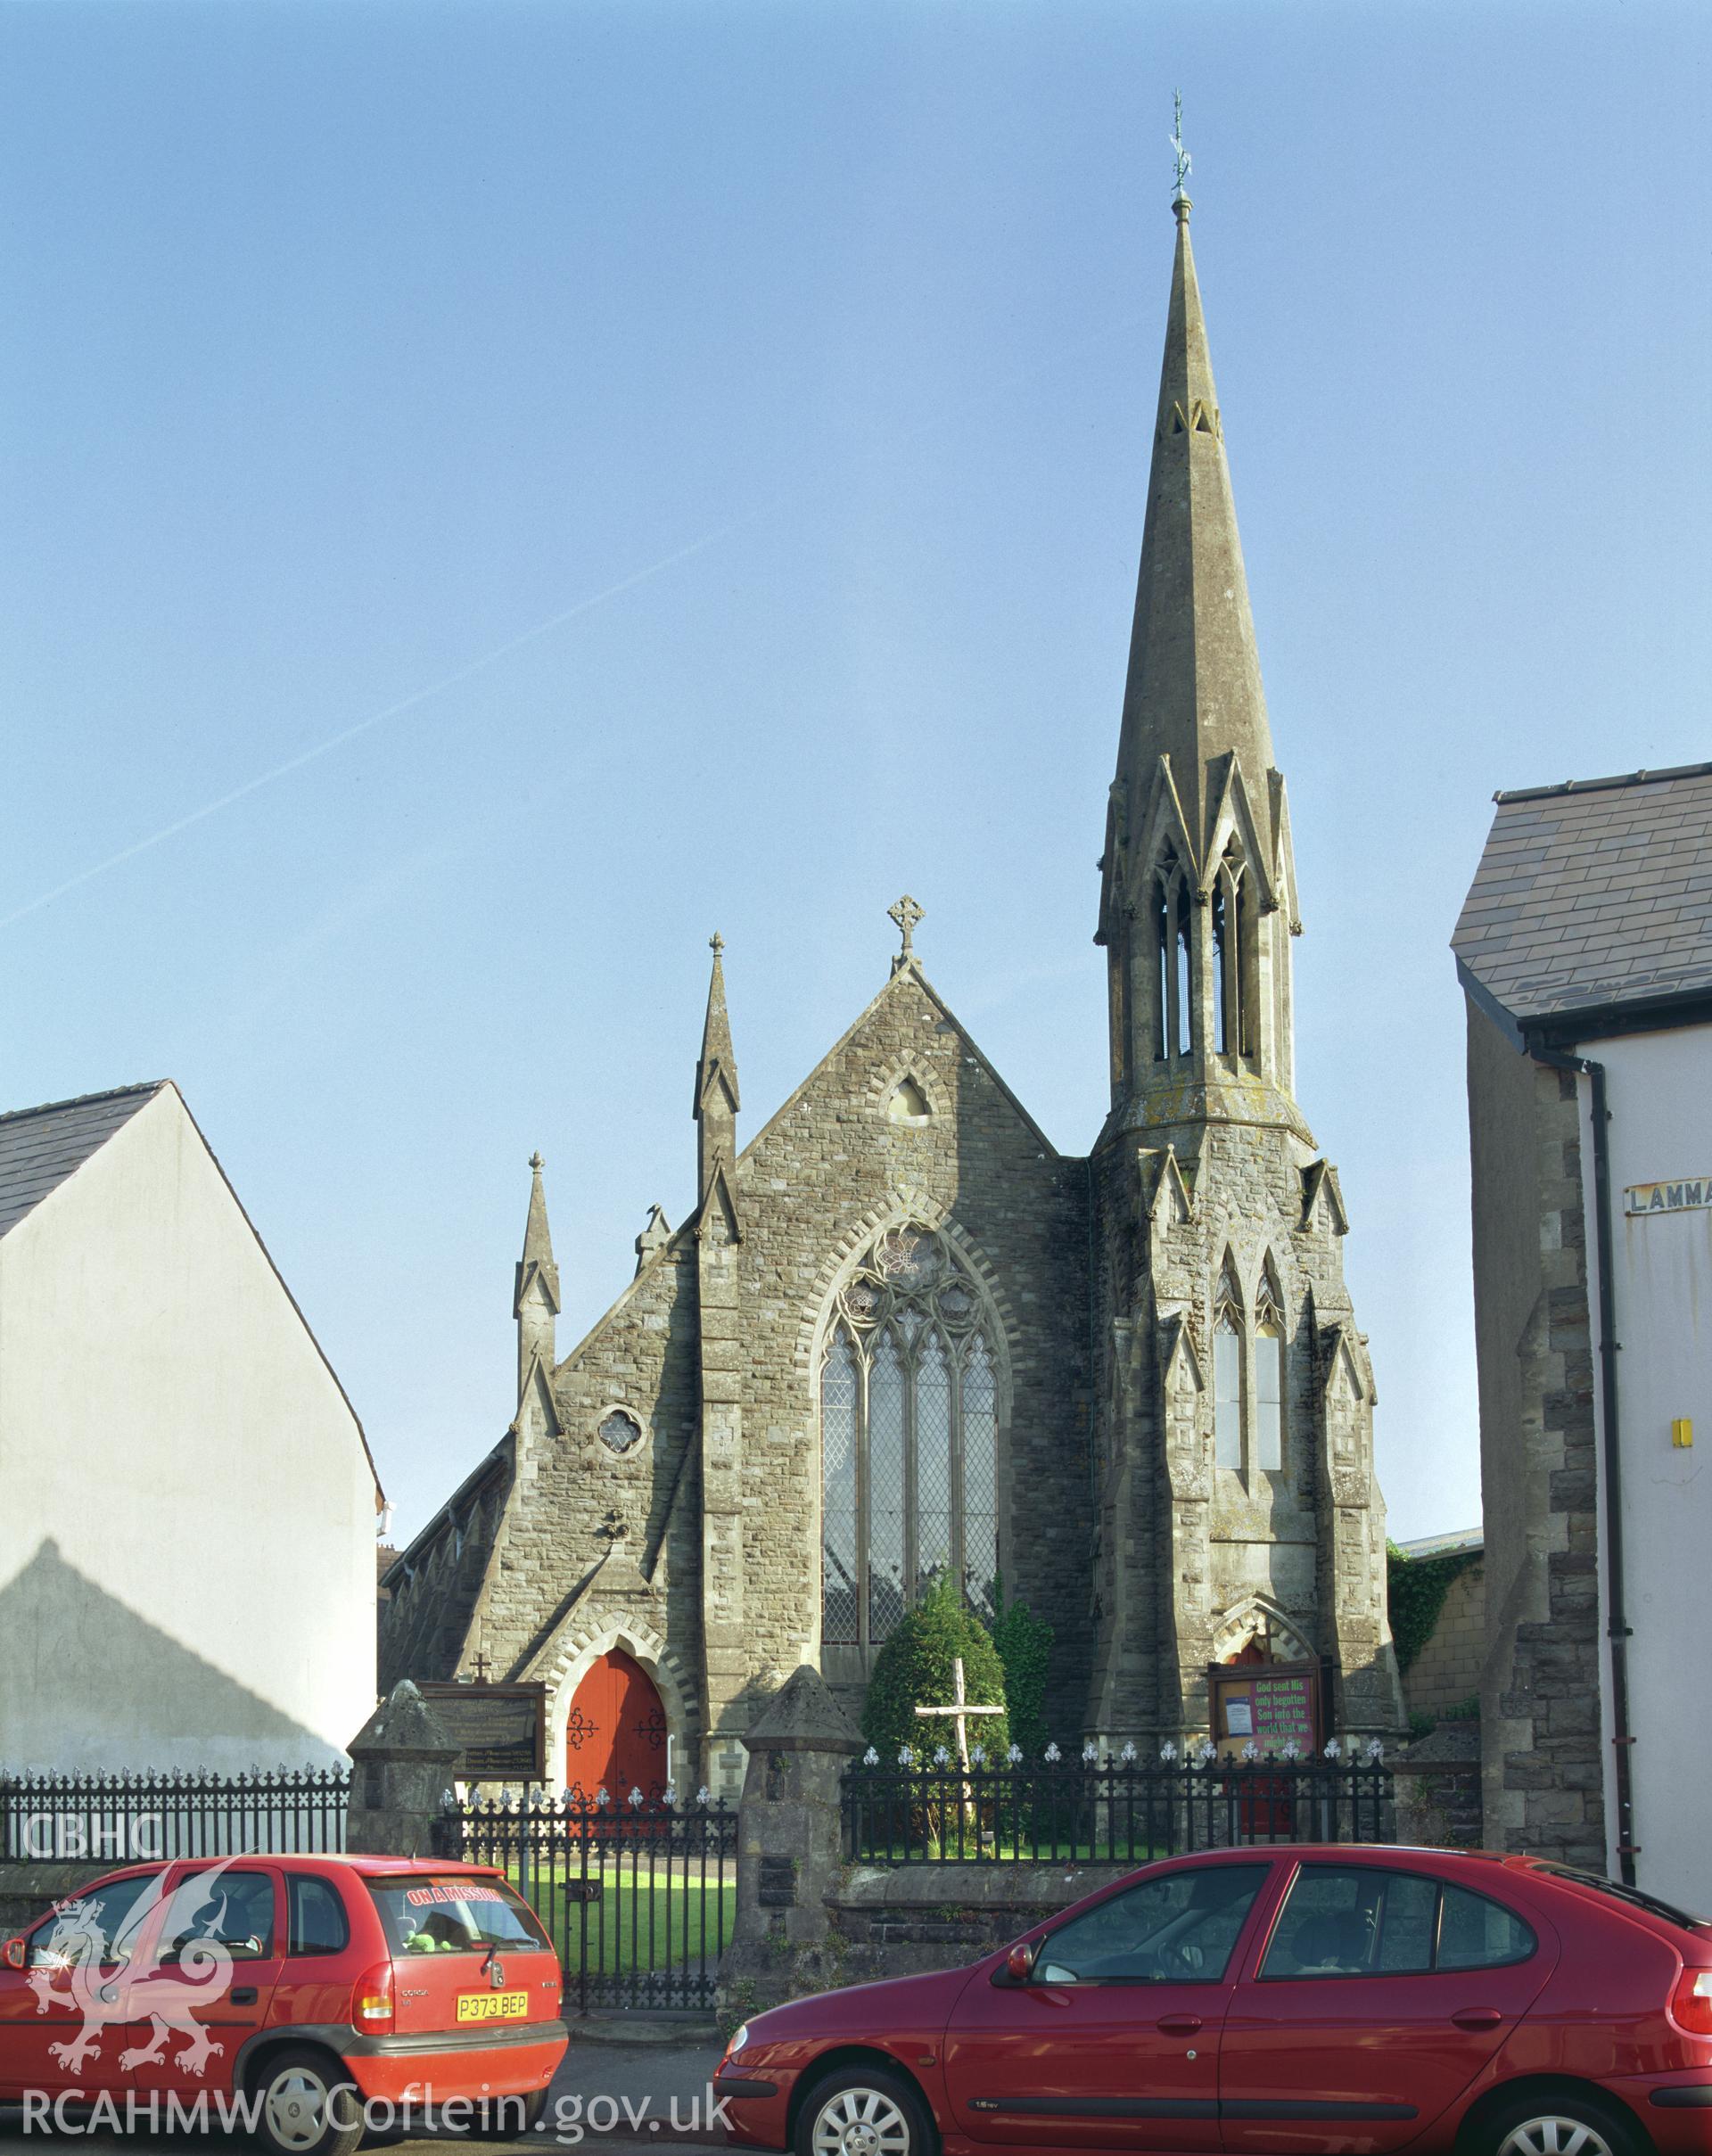 Colour transparency showing exterior view of English Congregational Chapel, Lammas Street, Carmarthen, produced by Iain Wright, June 2004.